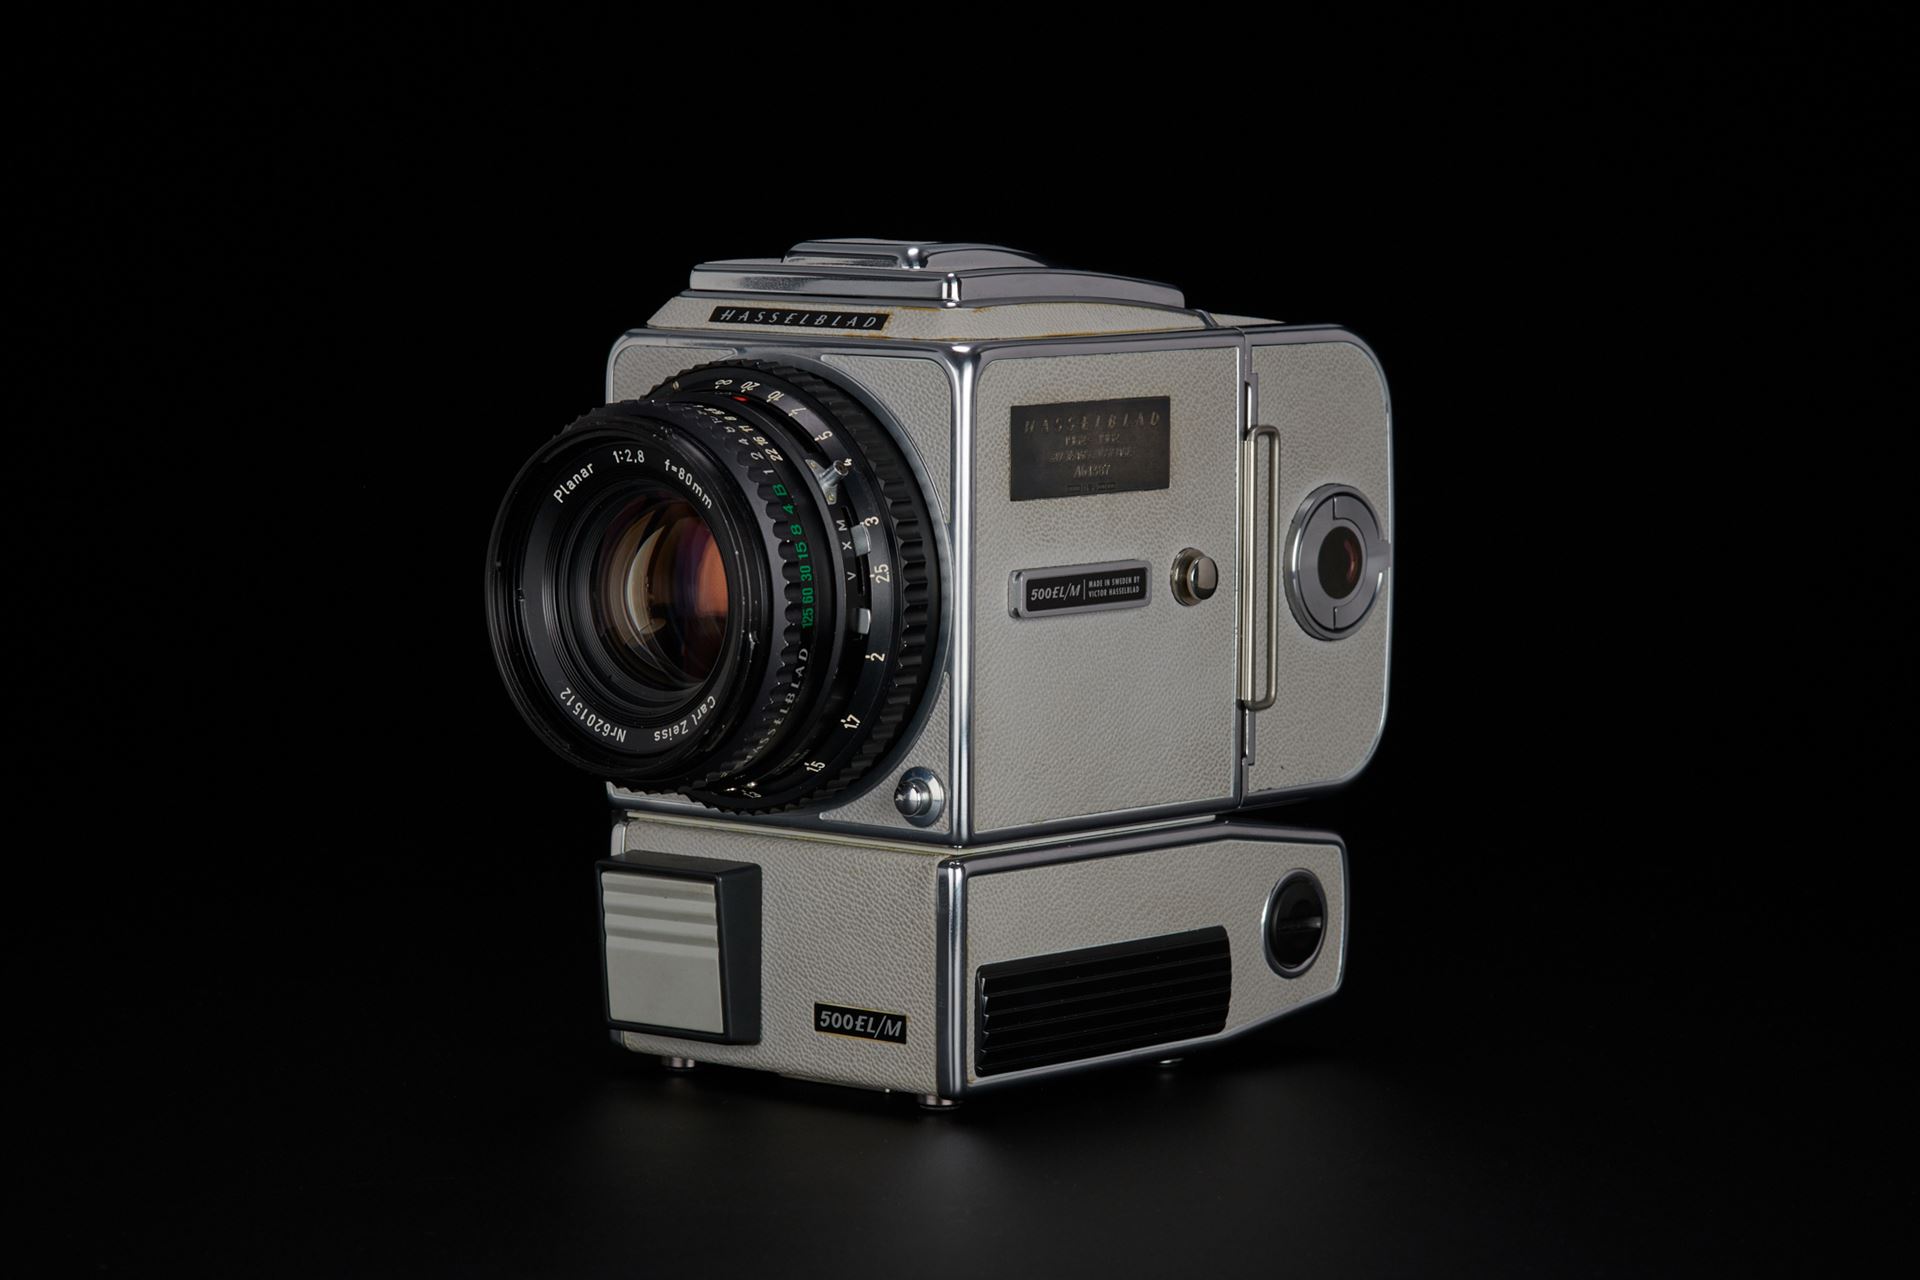 Picture of hasselblad 500el/m "20 years in space"